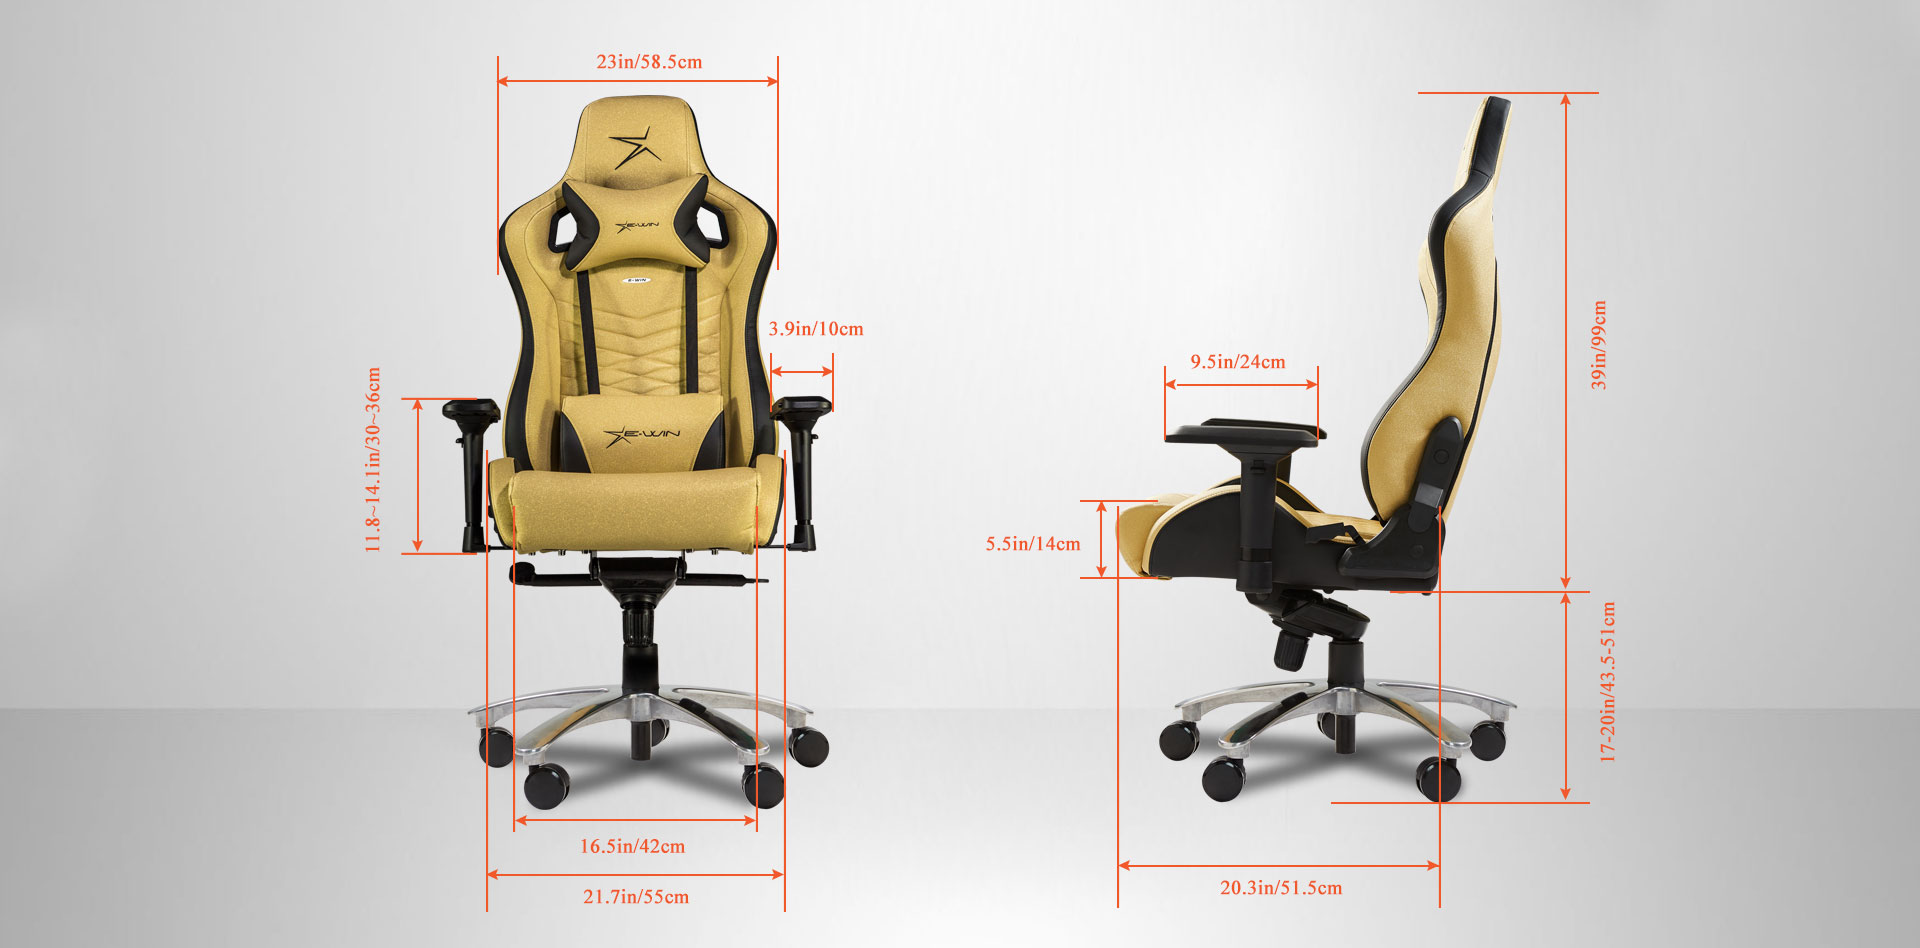 EwinRacing Champion Gaming Chairs Dimensions